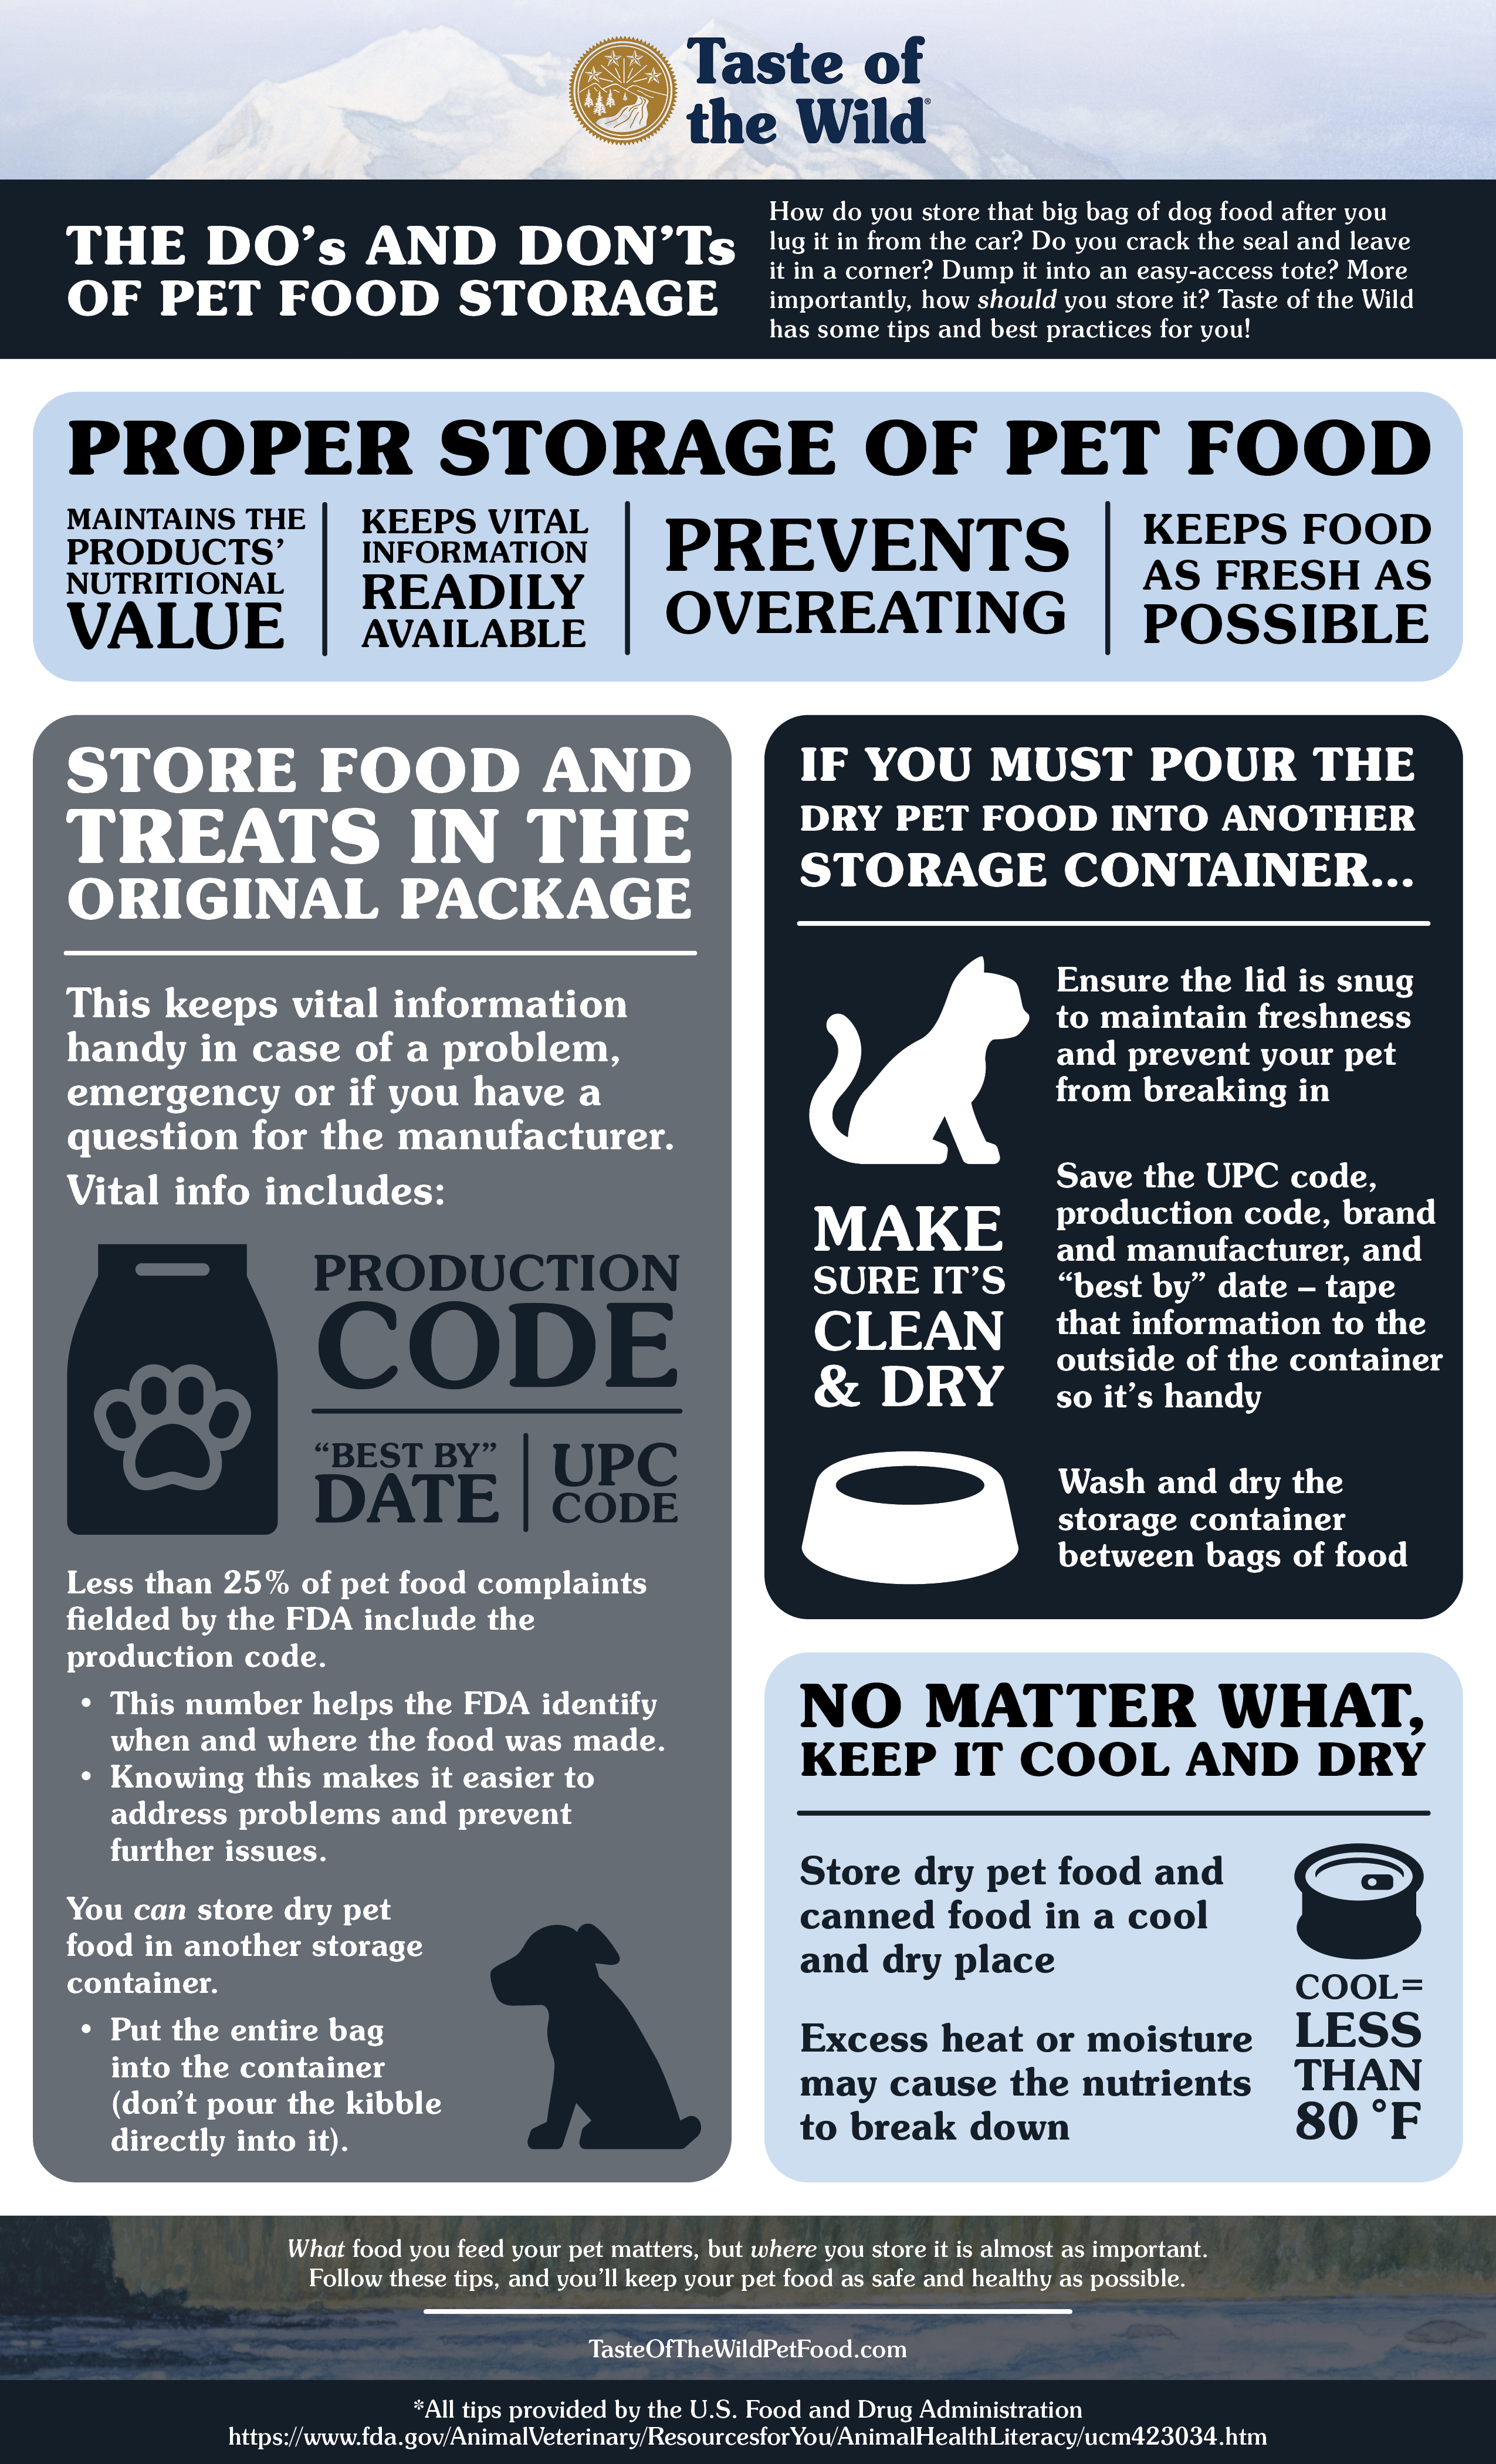 An interior graphic detailing the do's and don'ts of pet food storage to ensure food remains as fresh as possible.